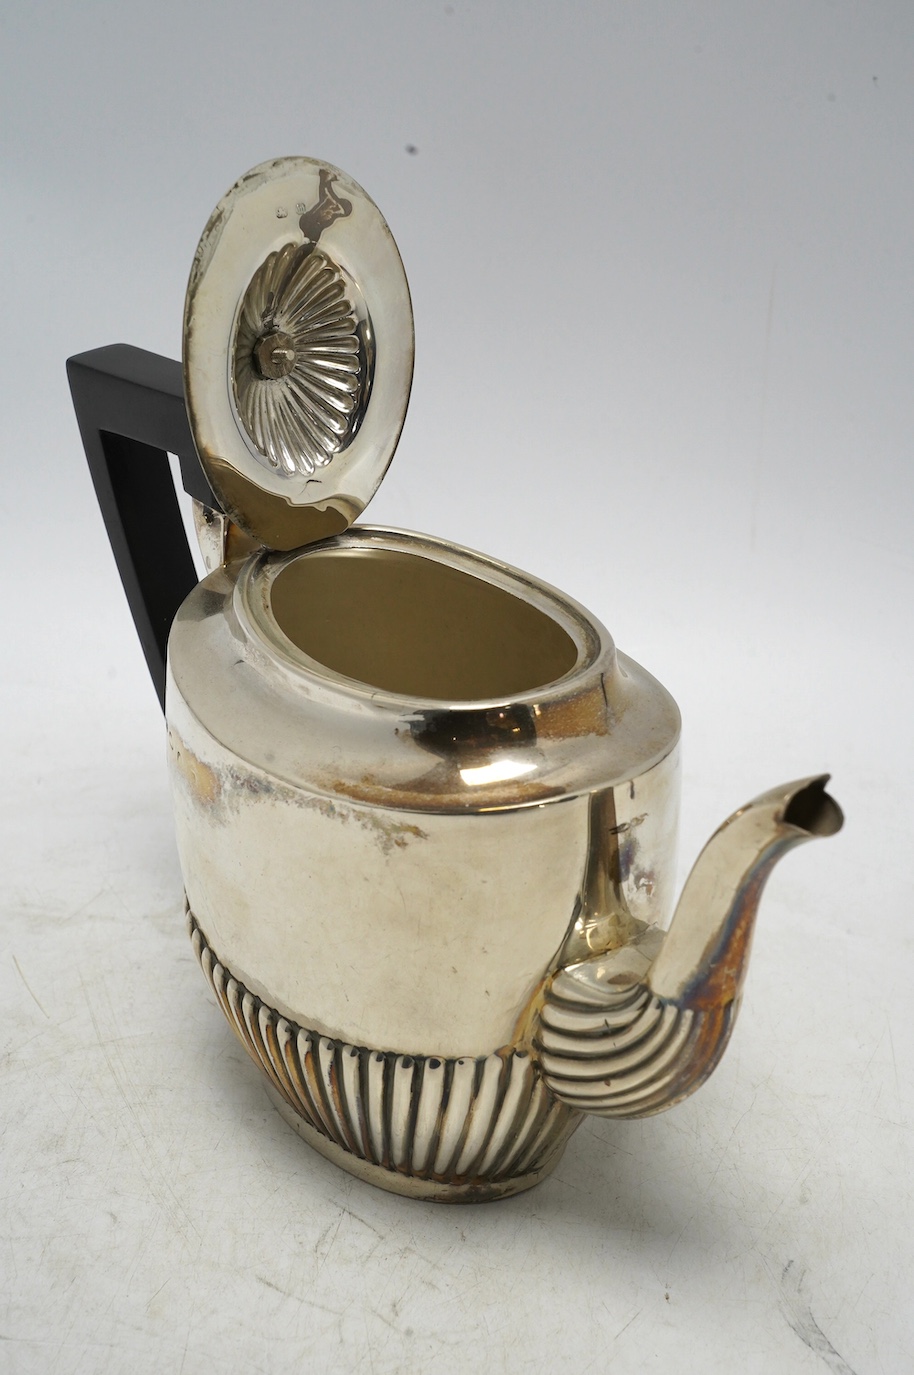 A late Victorian demi-fluted silver oval teapot, by Henry Bourne, Birmingham, 1896, gross weight 11.4oz. Condition - fair